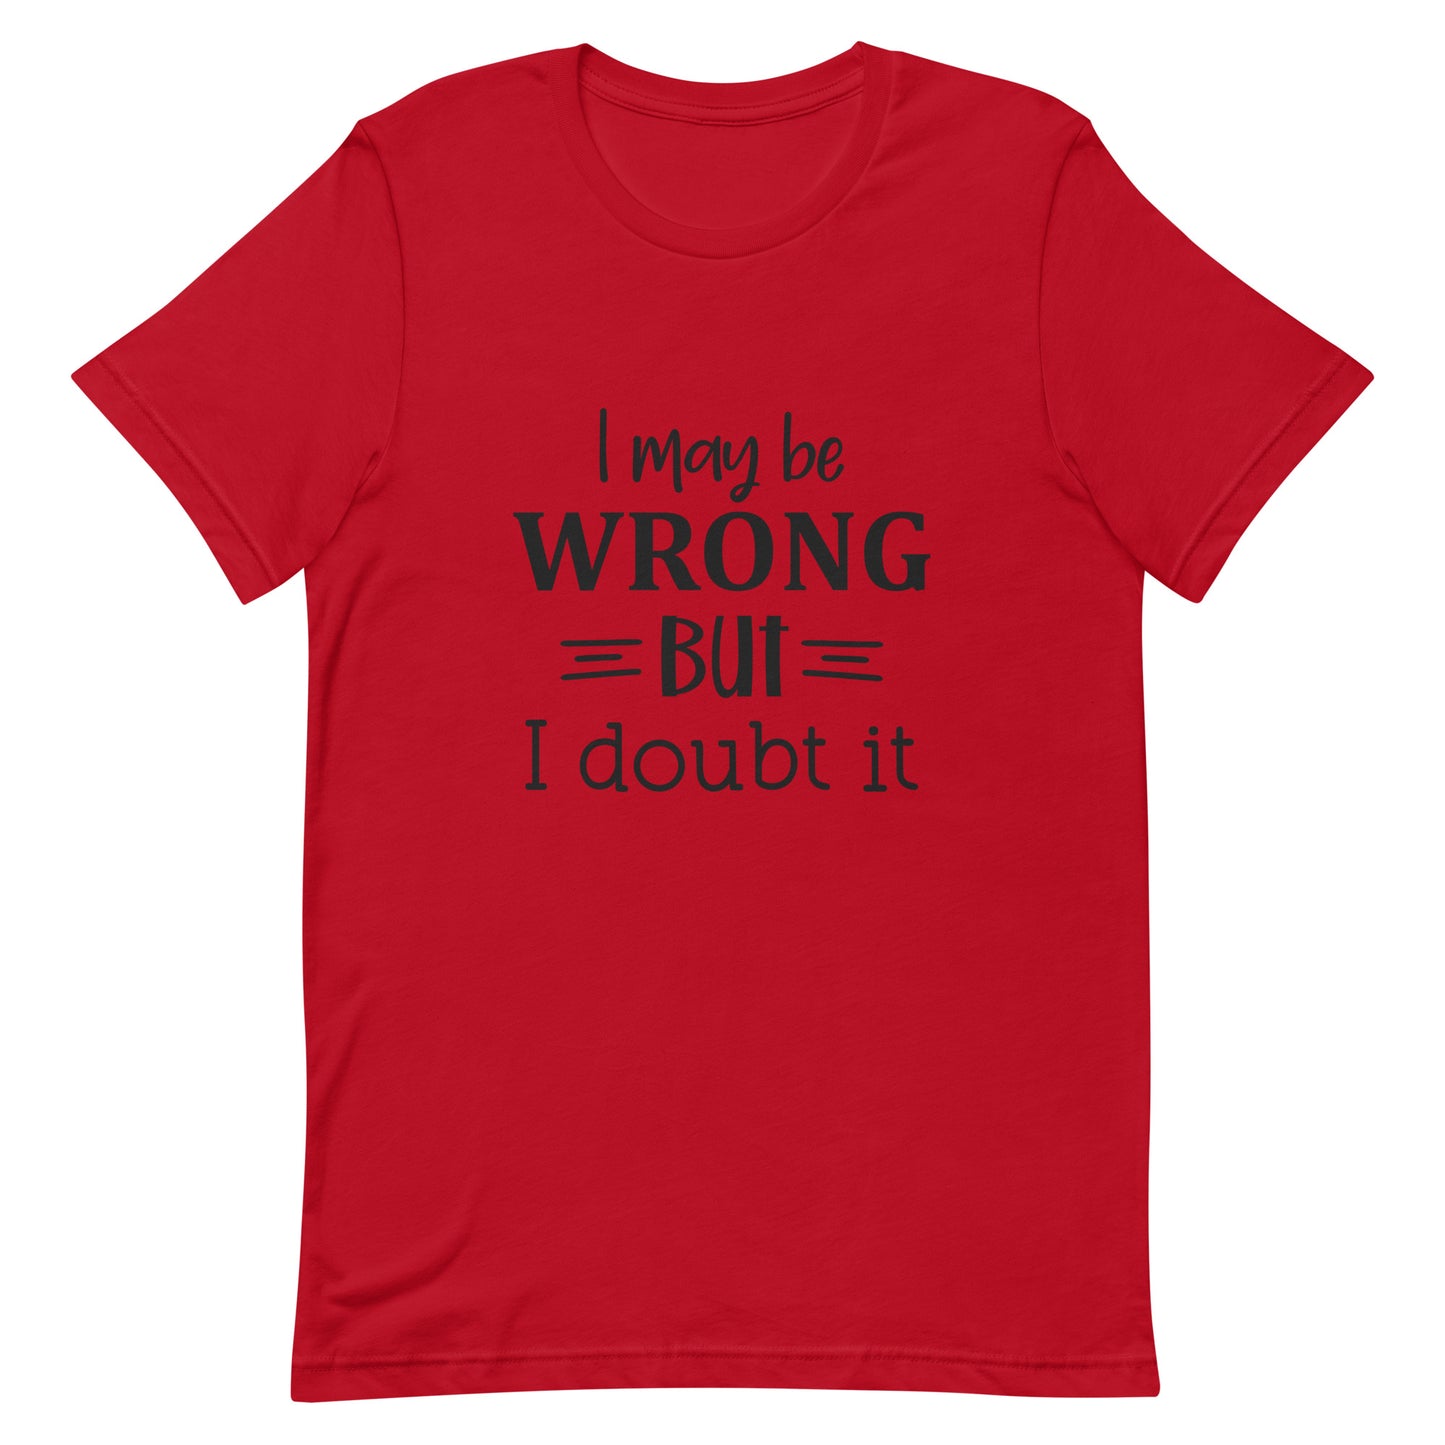 I May be Wrong But I Doubt It Unisex t-shirt